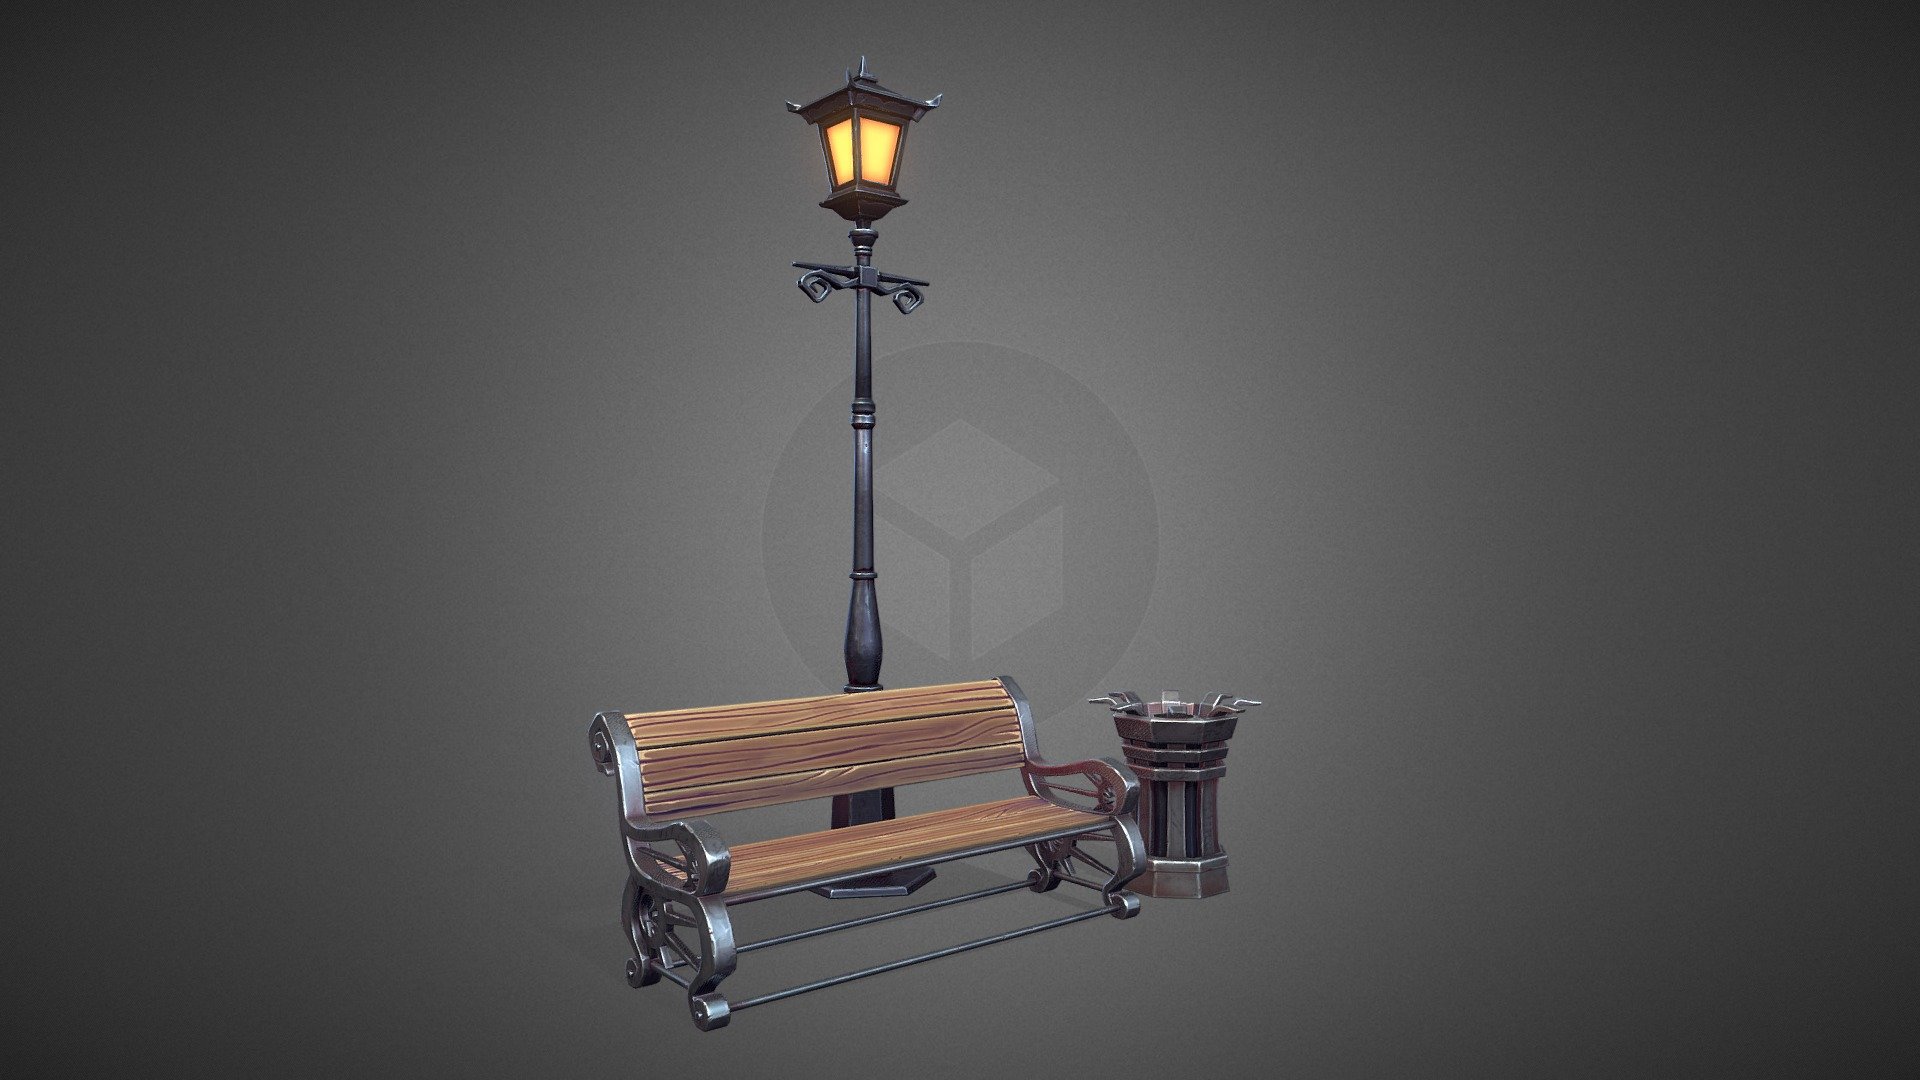 This is a style test for my current game project which has something between a top-down and a isometric view.

Feedback would be greatly appreciated! - Stylized Street Lamp, Bench and Trash Can - 3D model by Shaddy 3d model